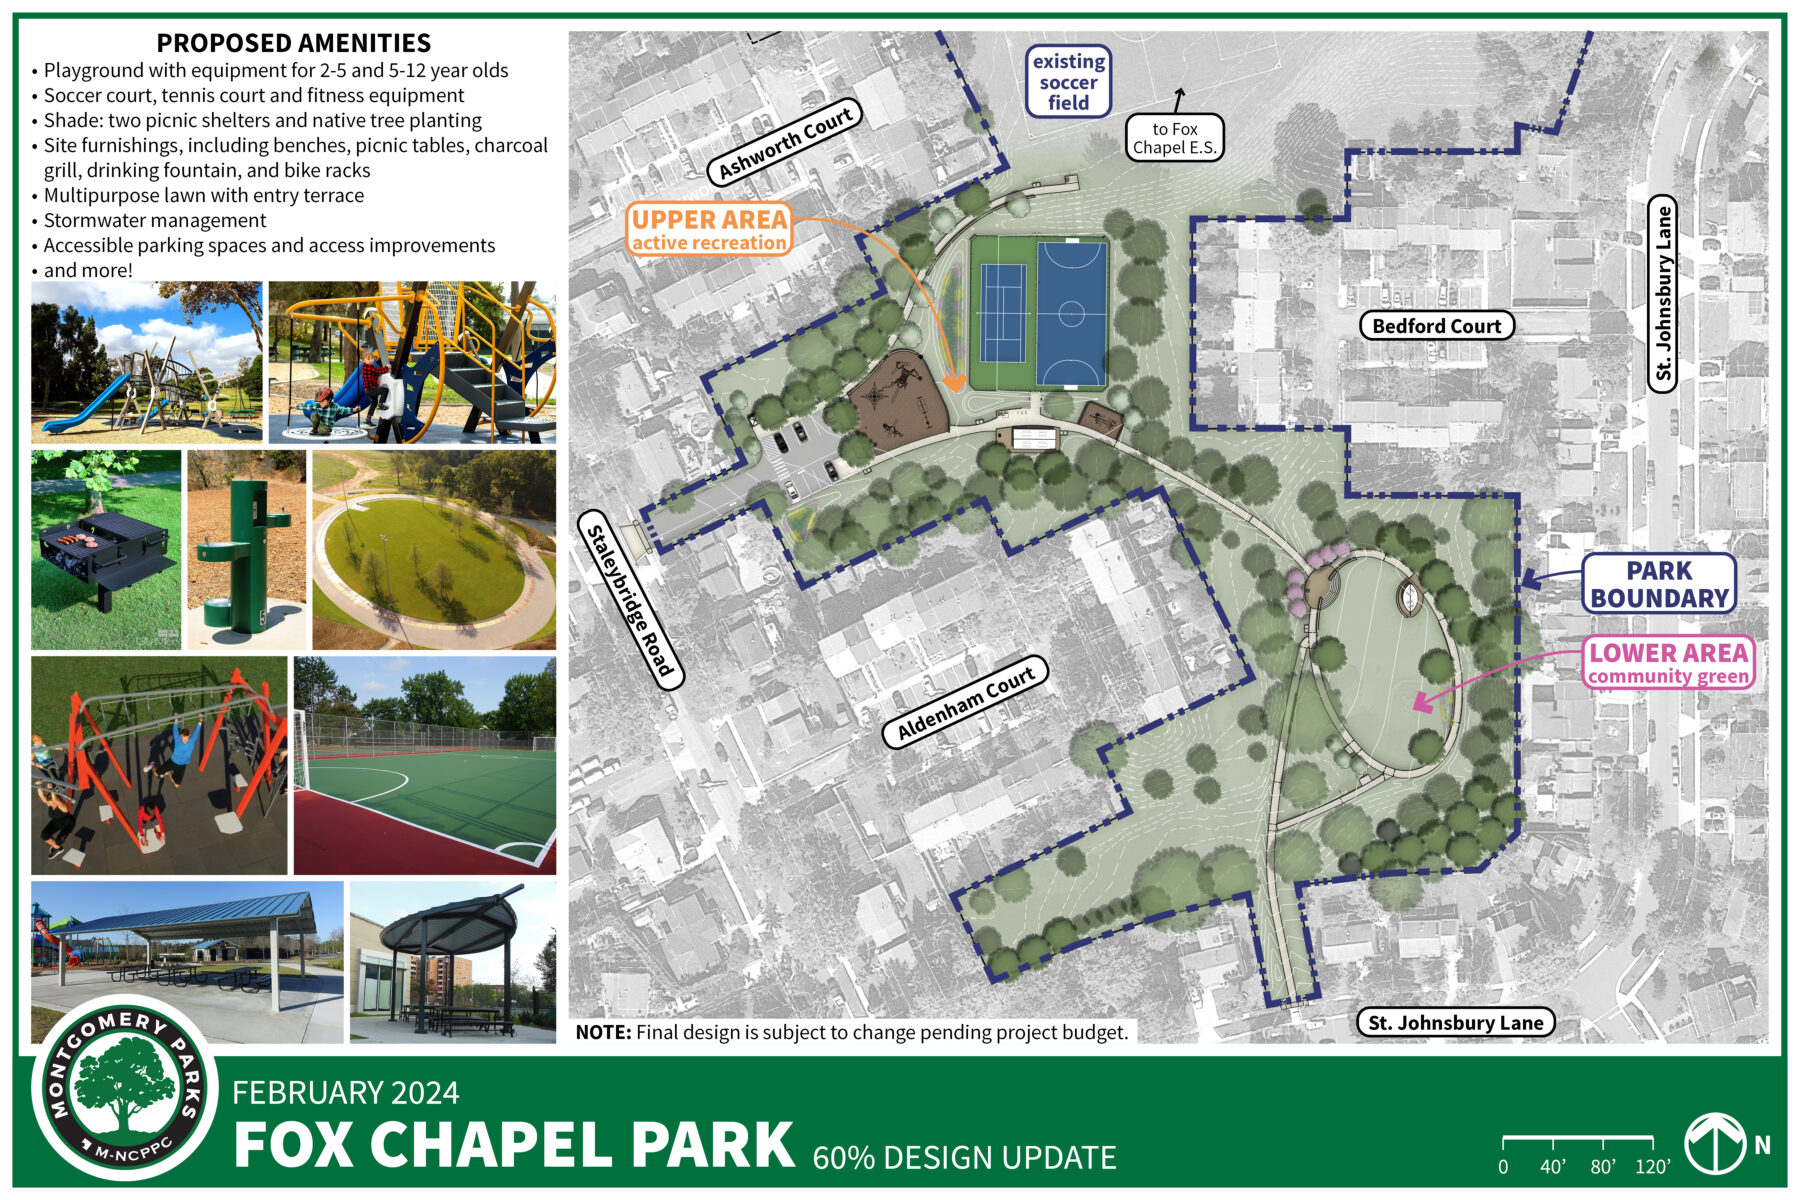 Aerial map of Fox Chapel Park showing the upcoming amenities, view Project Description for more information.